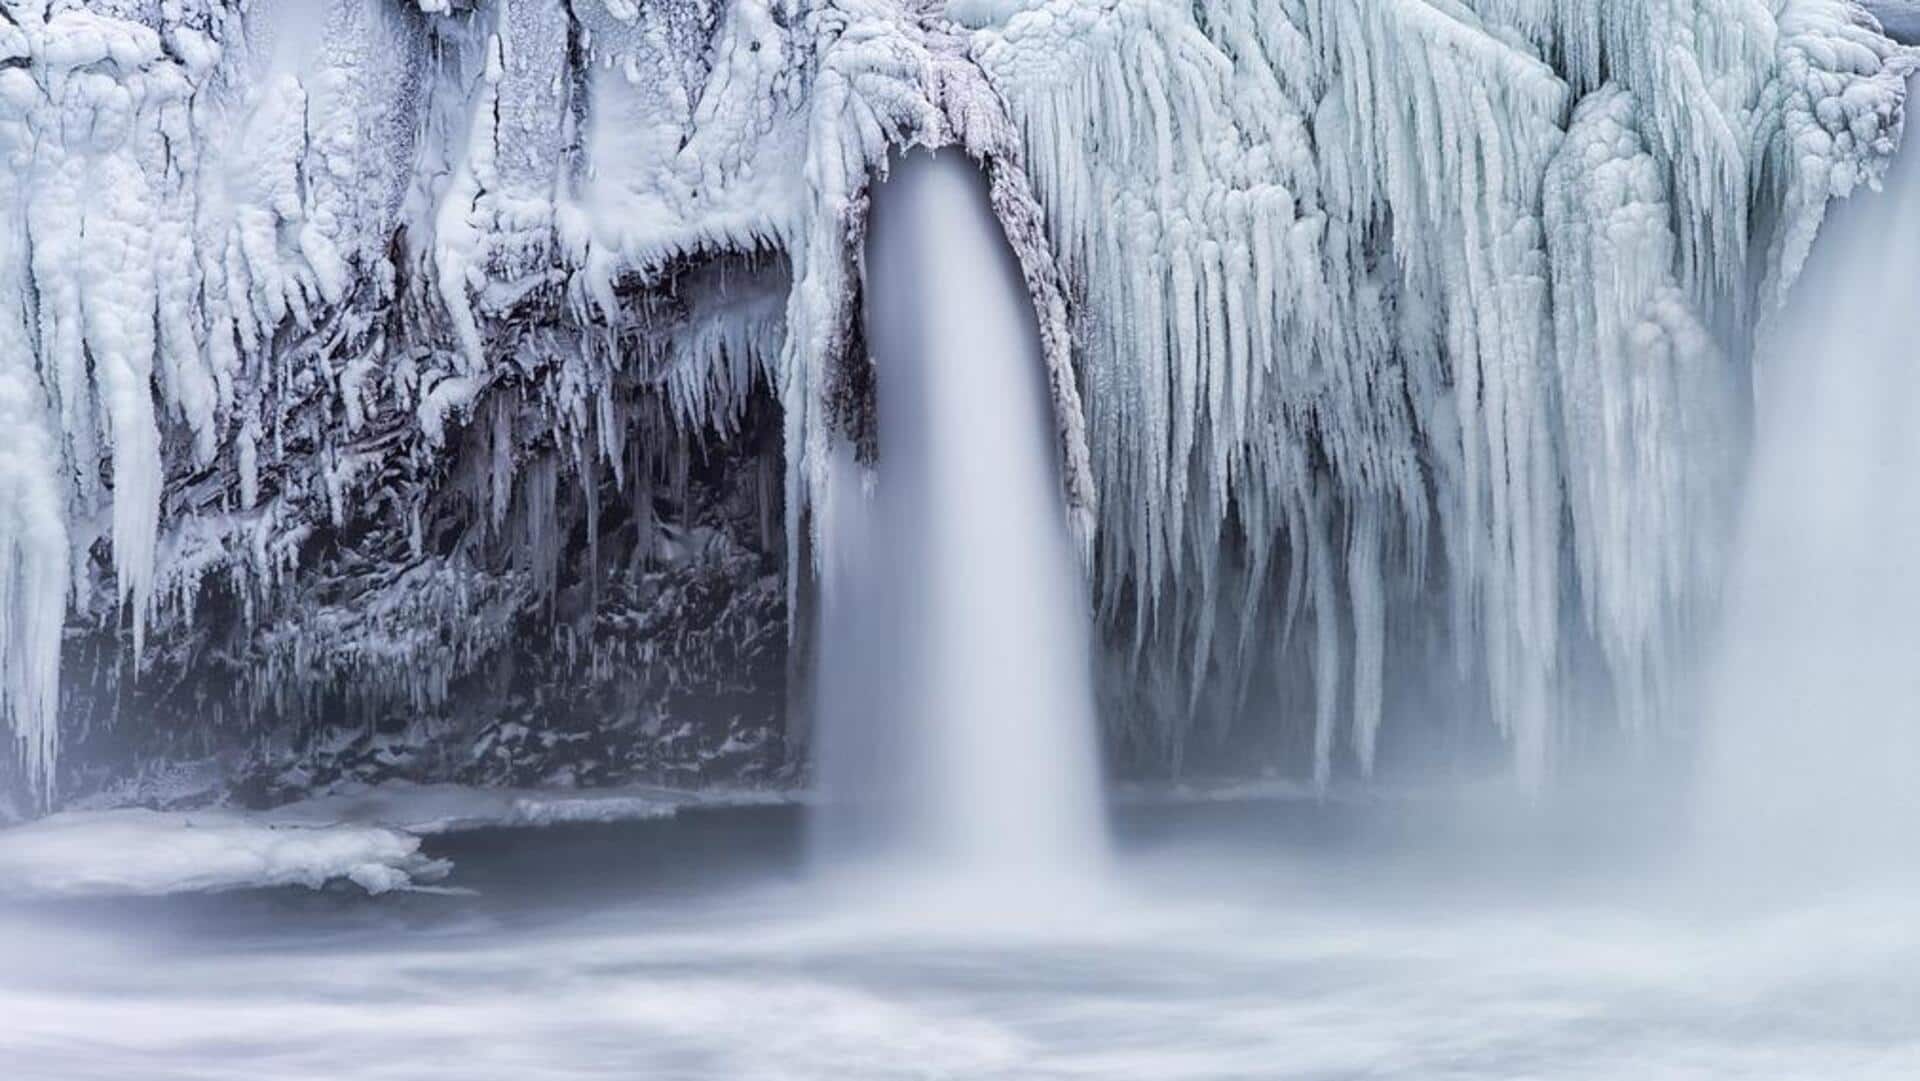 Head over to Iceland's mesmerizing frozen falls